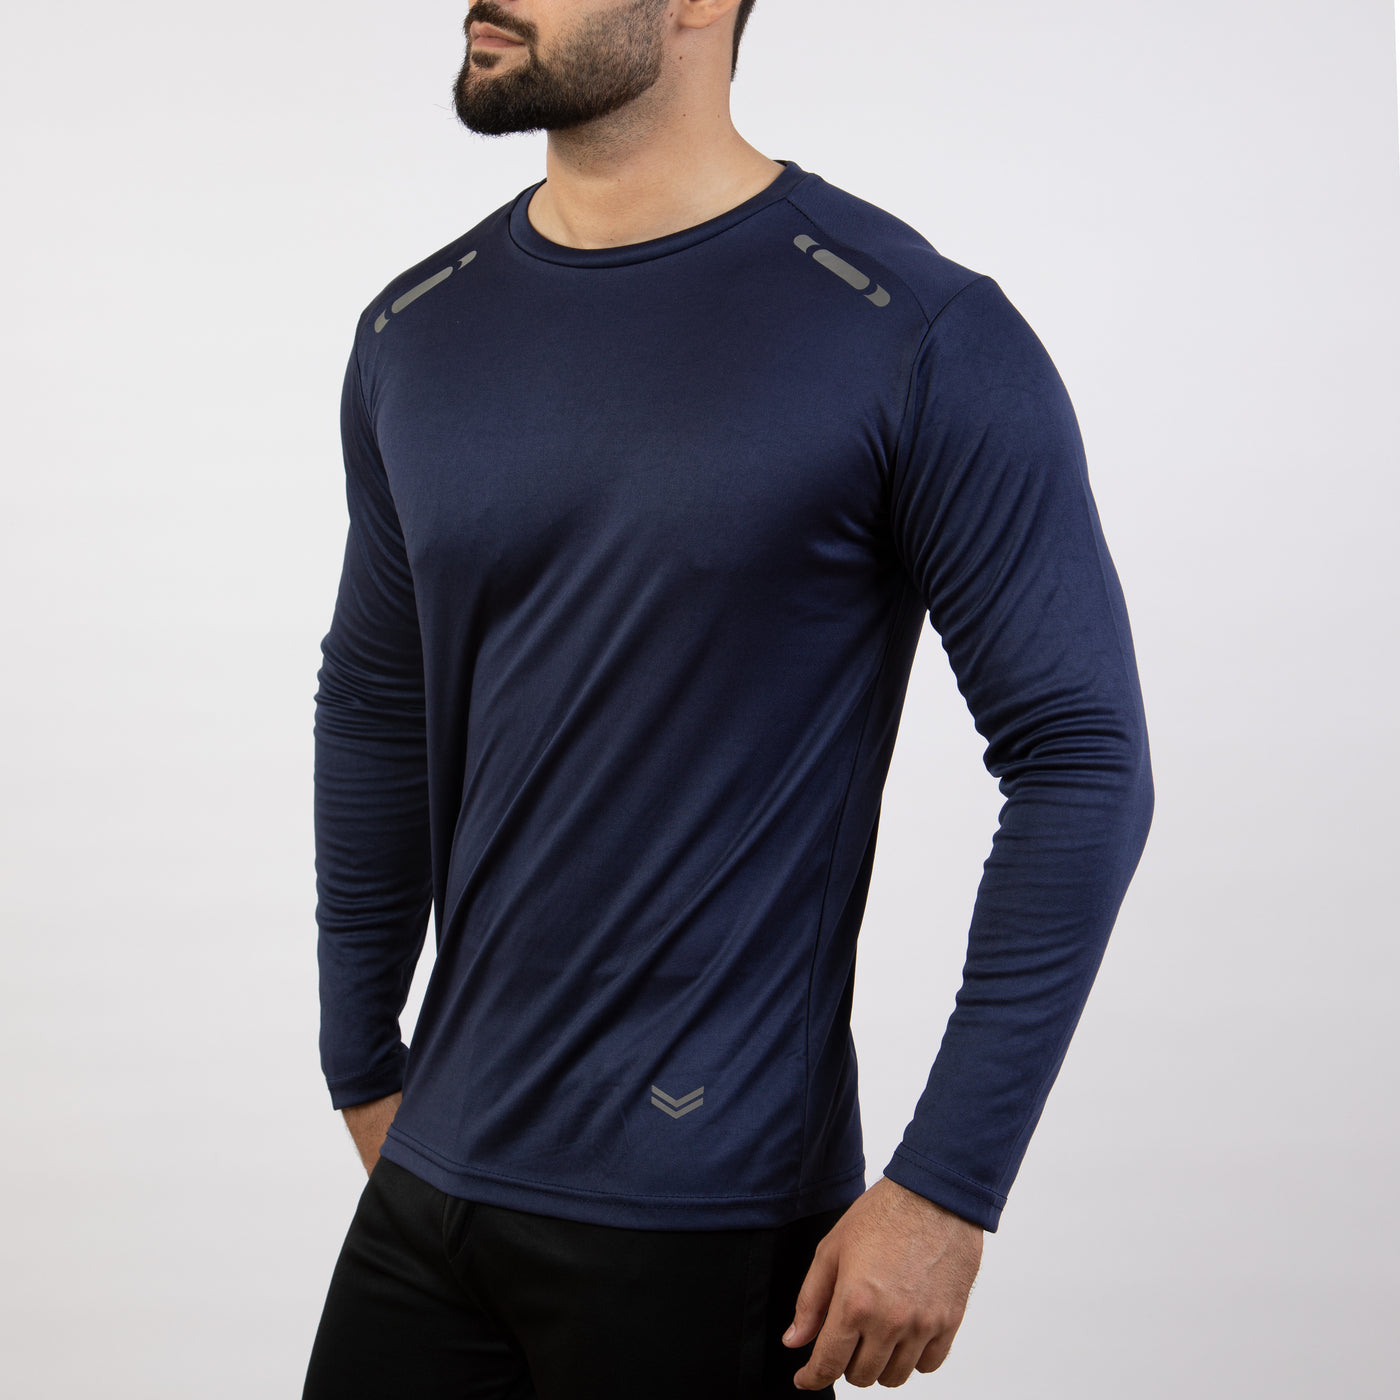 Navy Quick Dry Full Sleeves T-Shirt with Front Reflectors